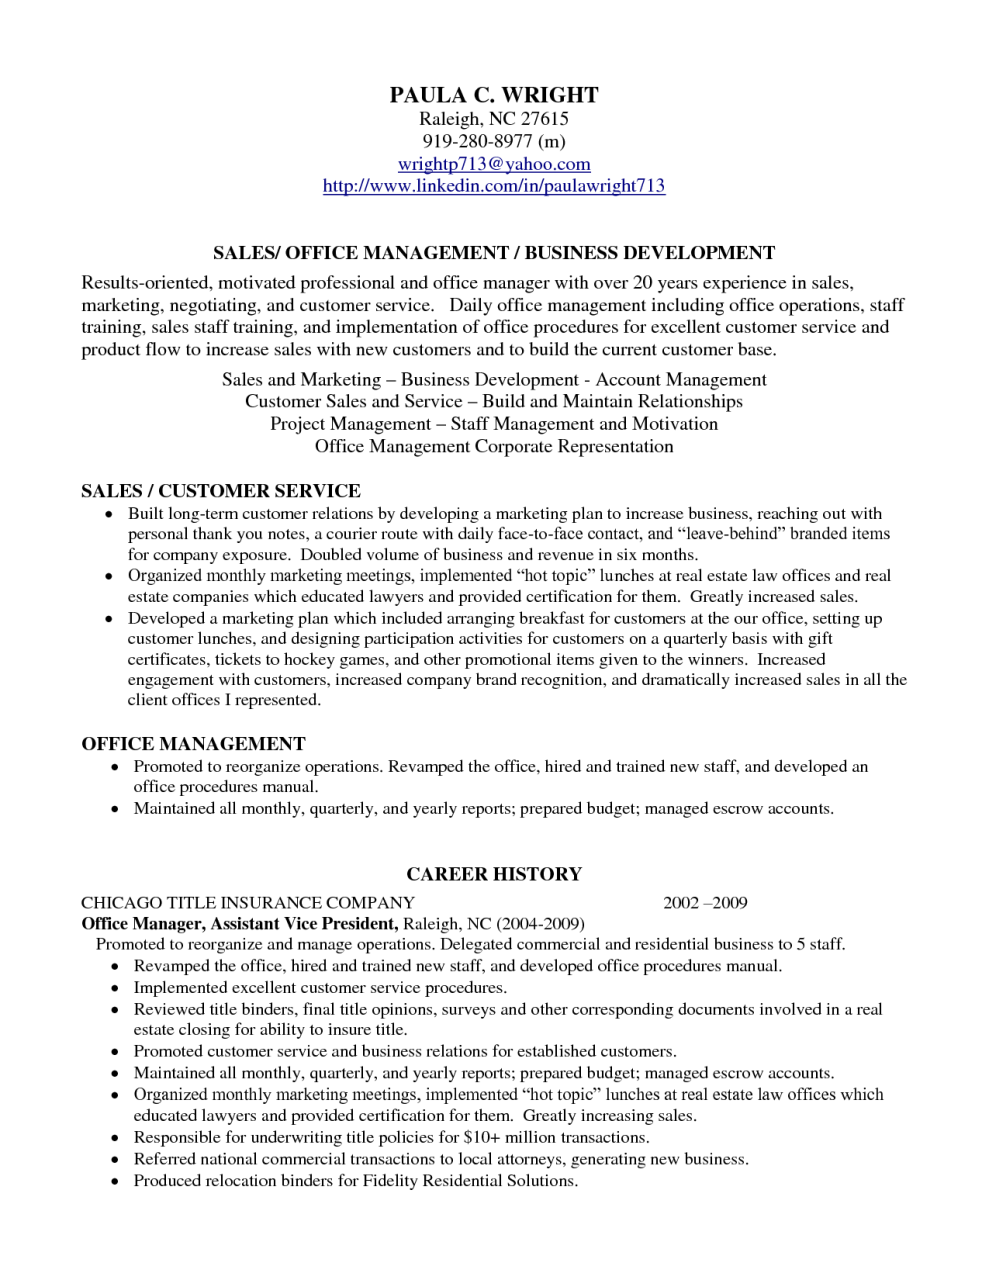 How To Write A Professional Profile For A Resume